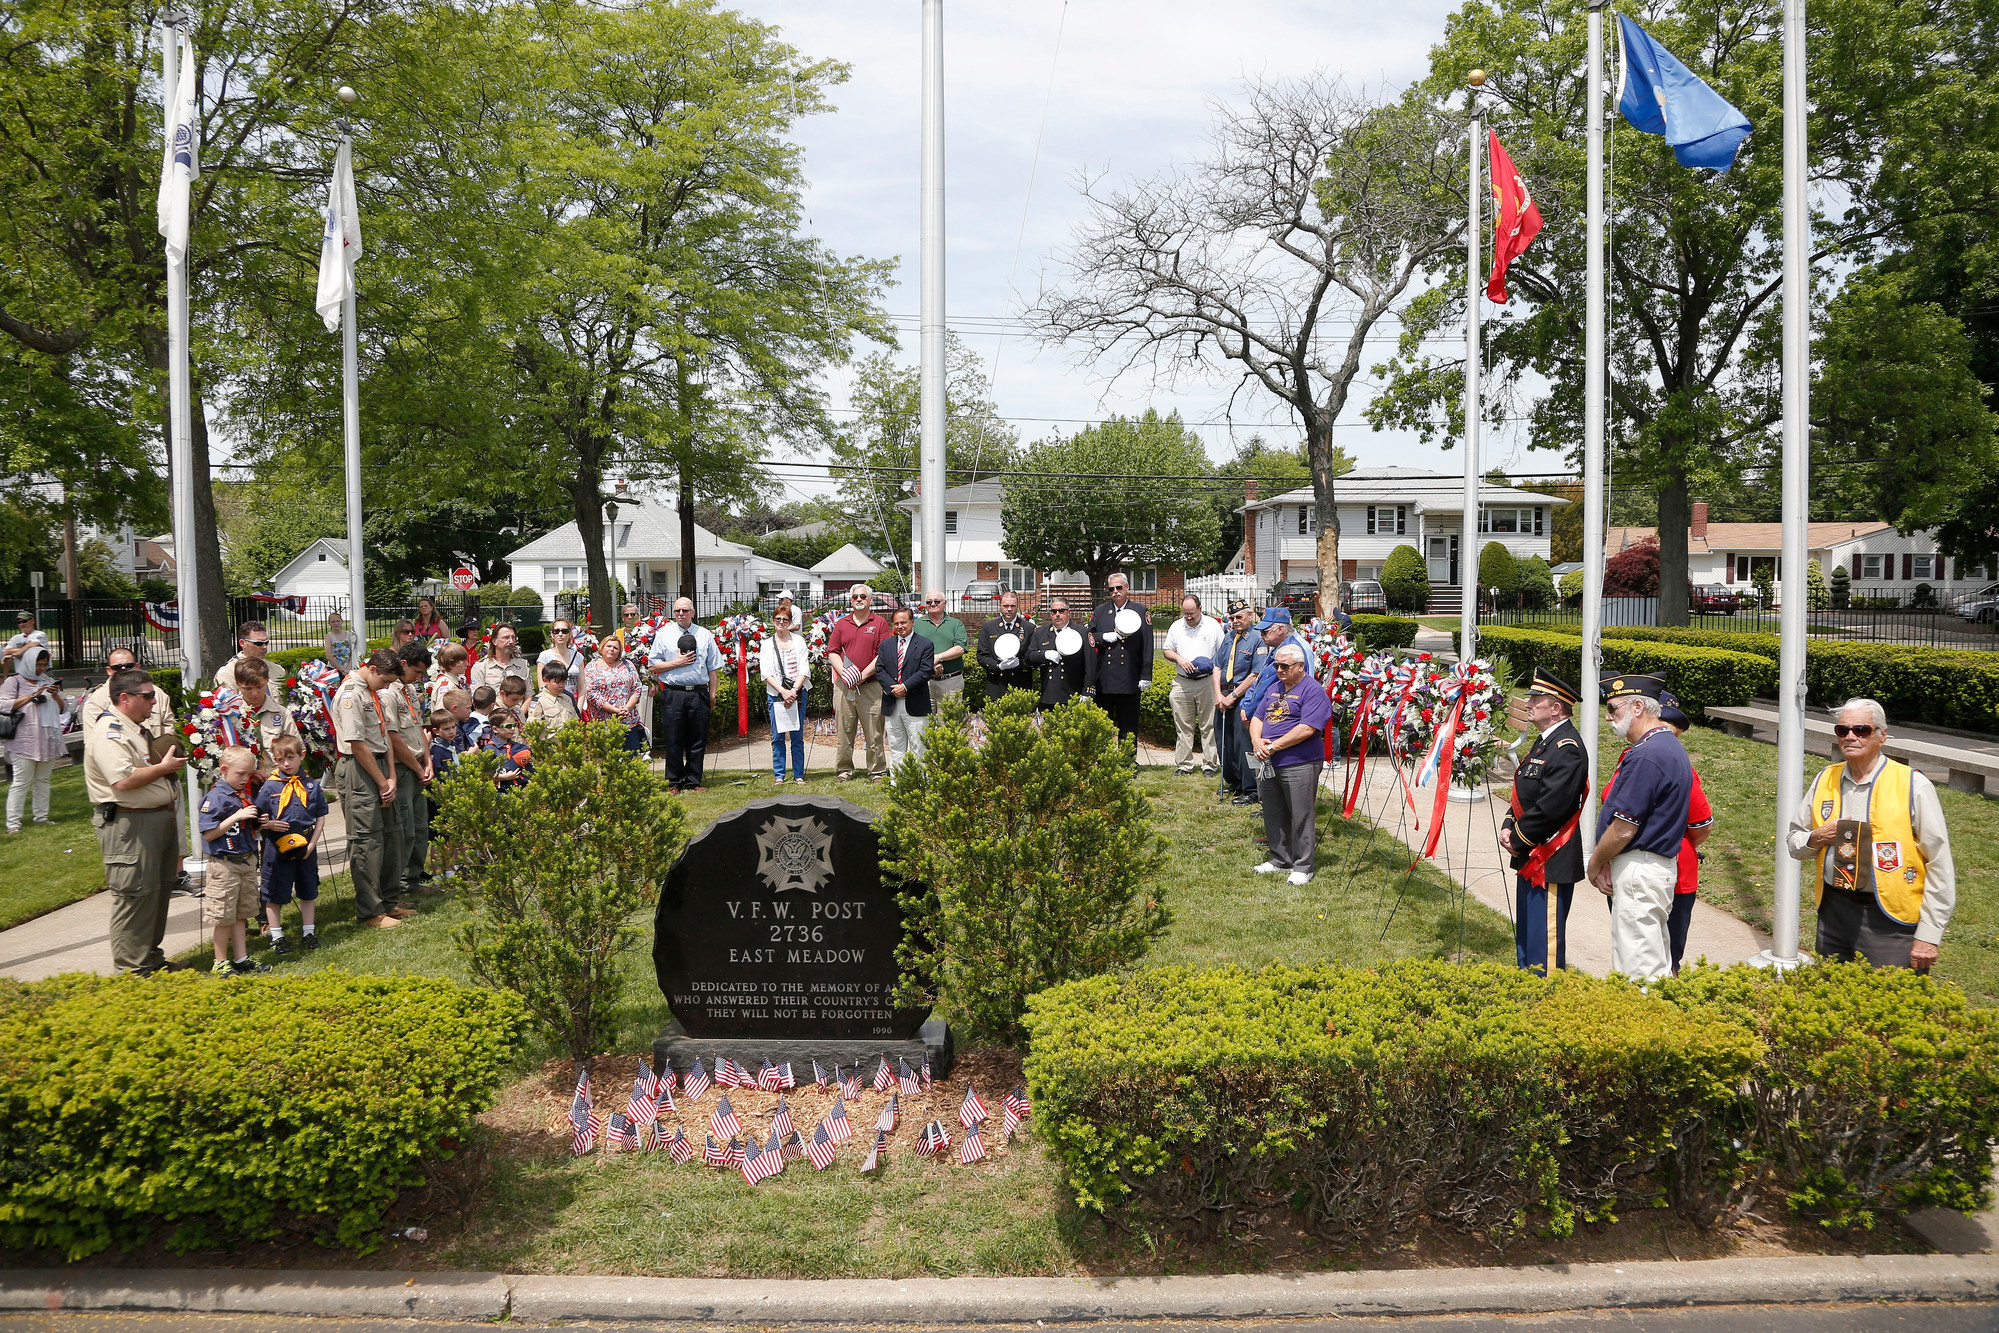 Following the parade, the Memorial Day ceremony took place at Veterans Memorial Park.